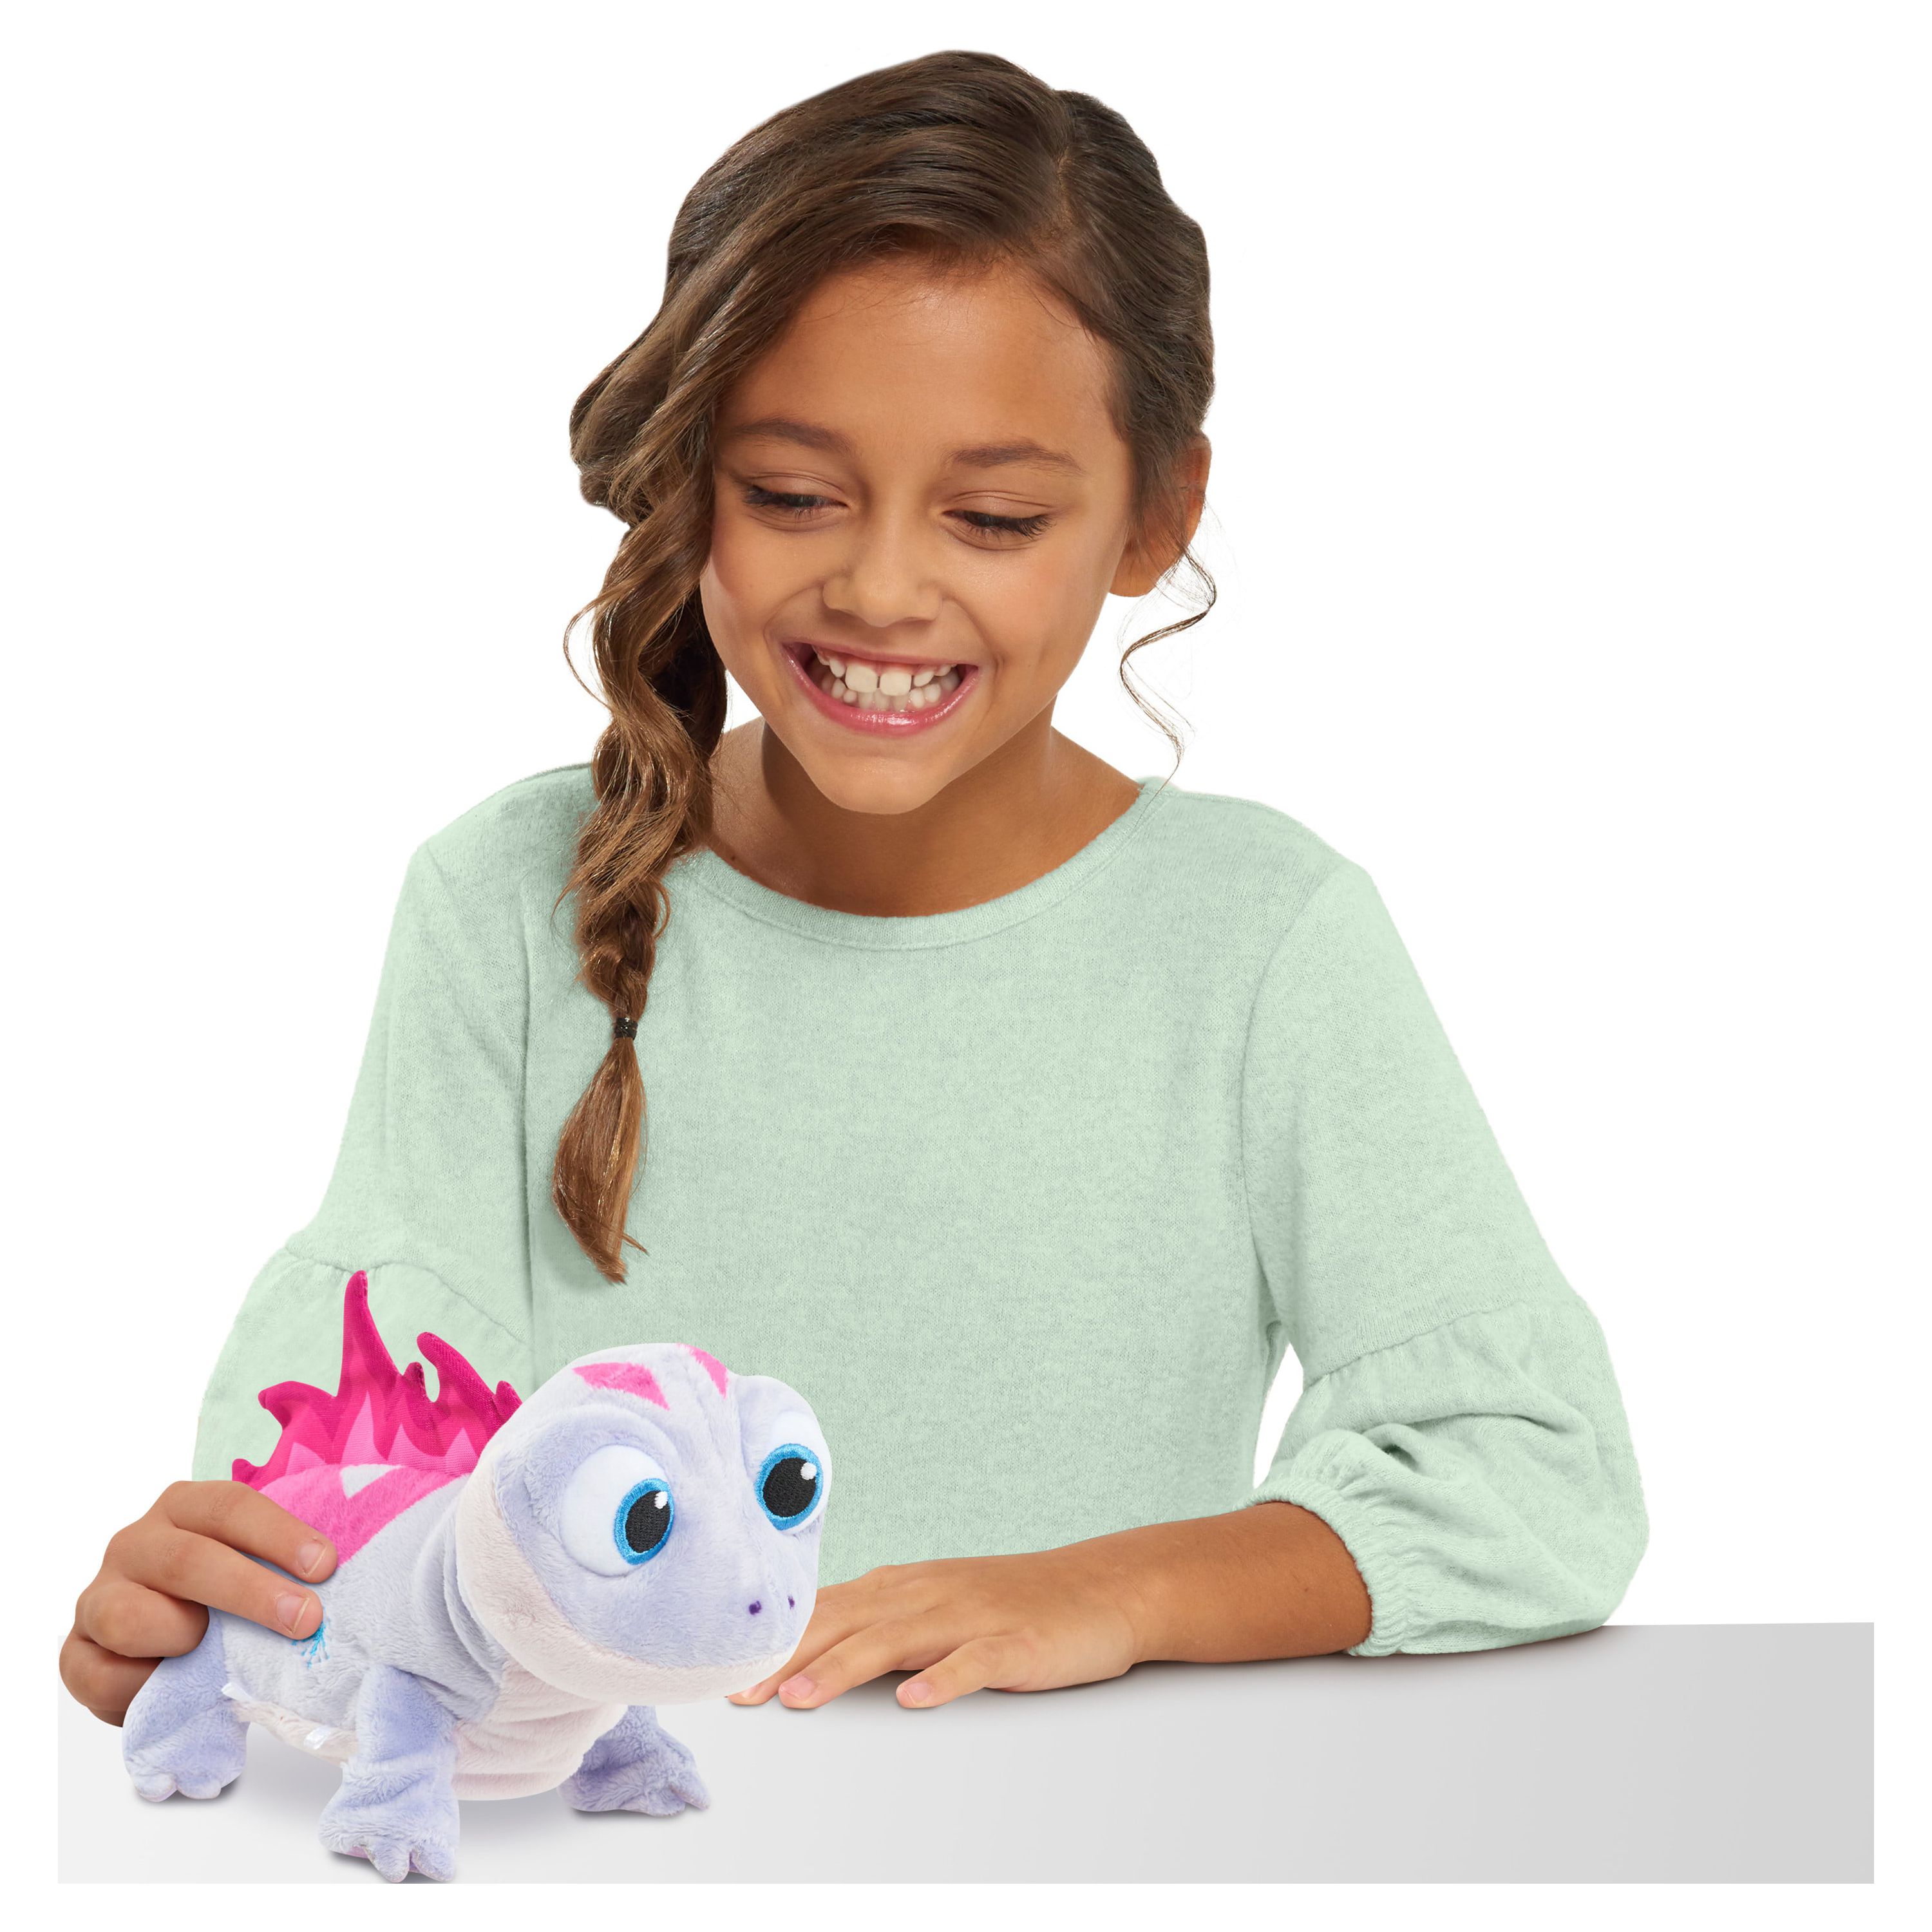 Disney Frozen 2 Walk & Glow Bruni The Salamander, Lights and Sounds Stuffed Animal, Officially Licensed Kids Toys for Ages 3 Up, Gifts and Presents - image 4 of 5